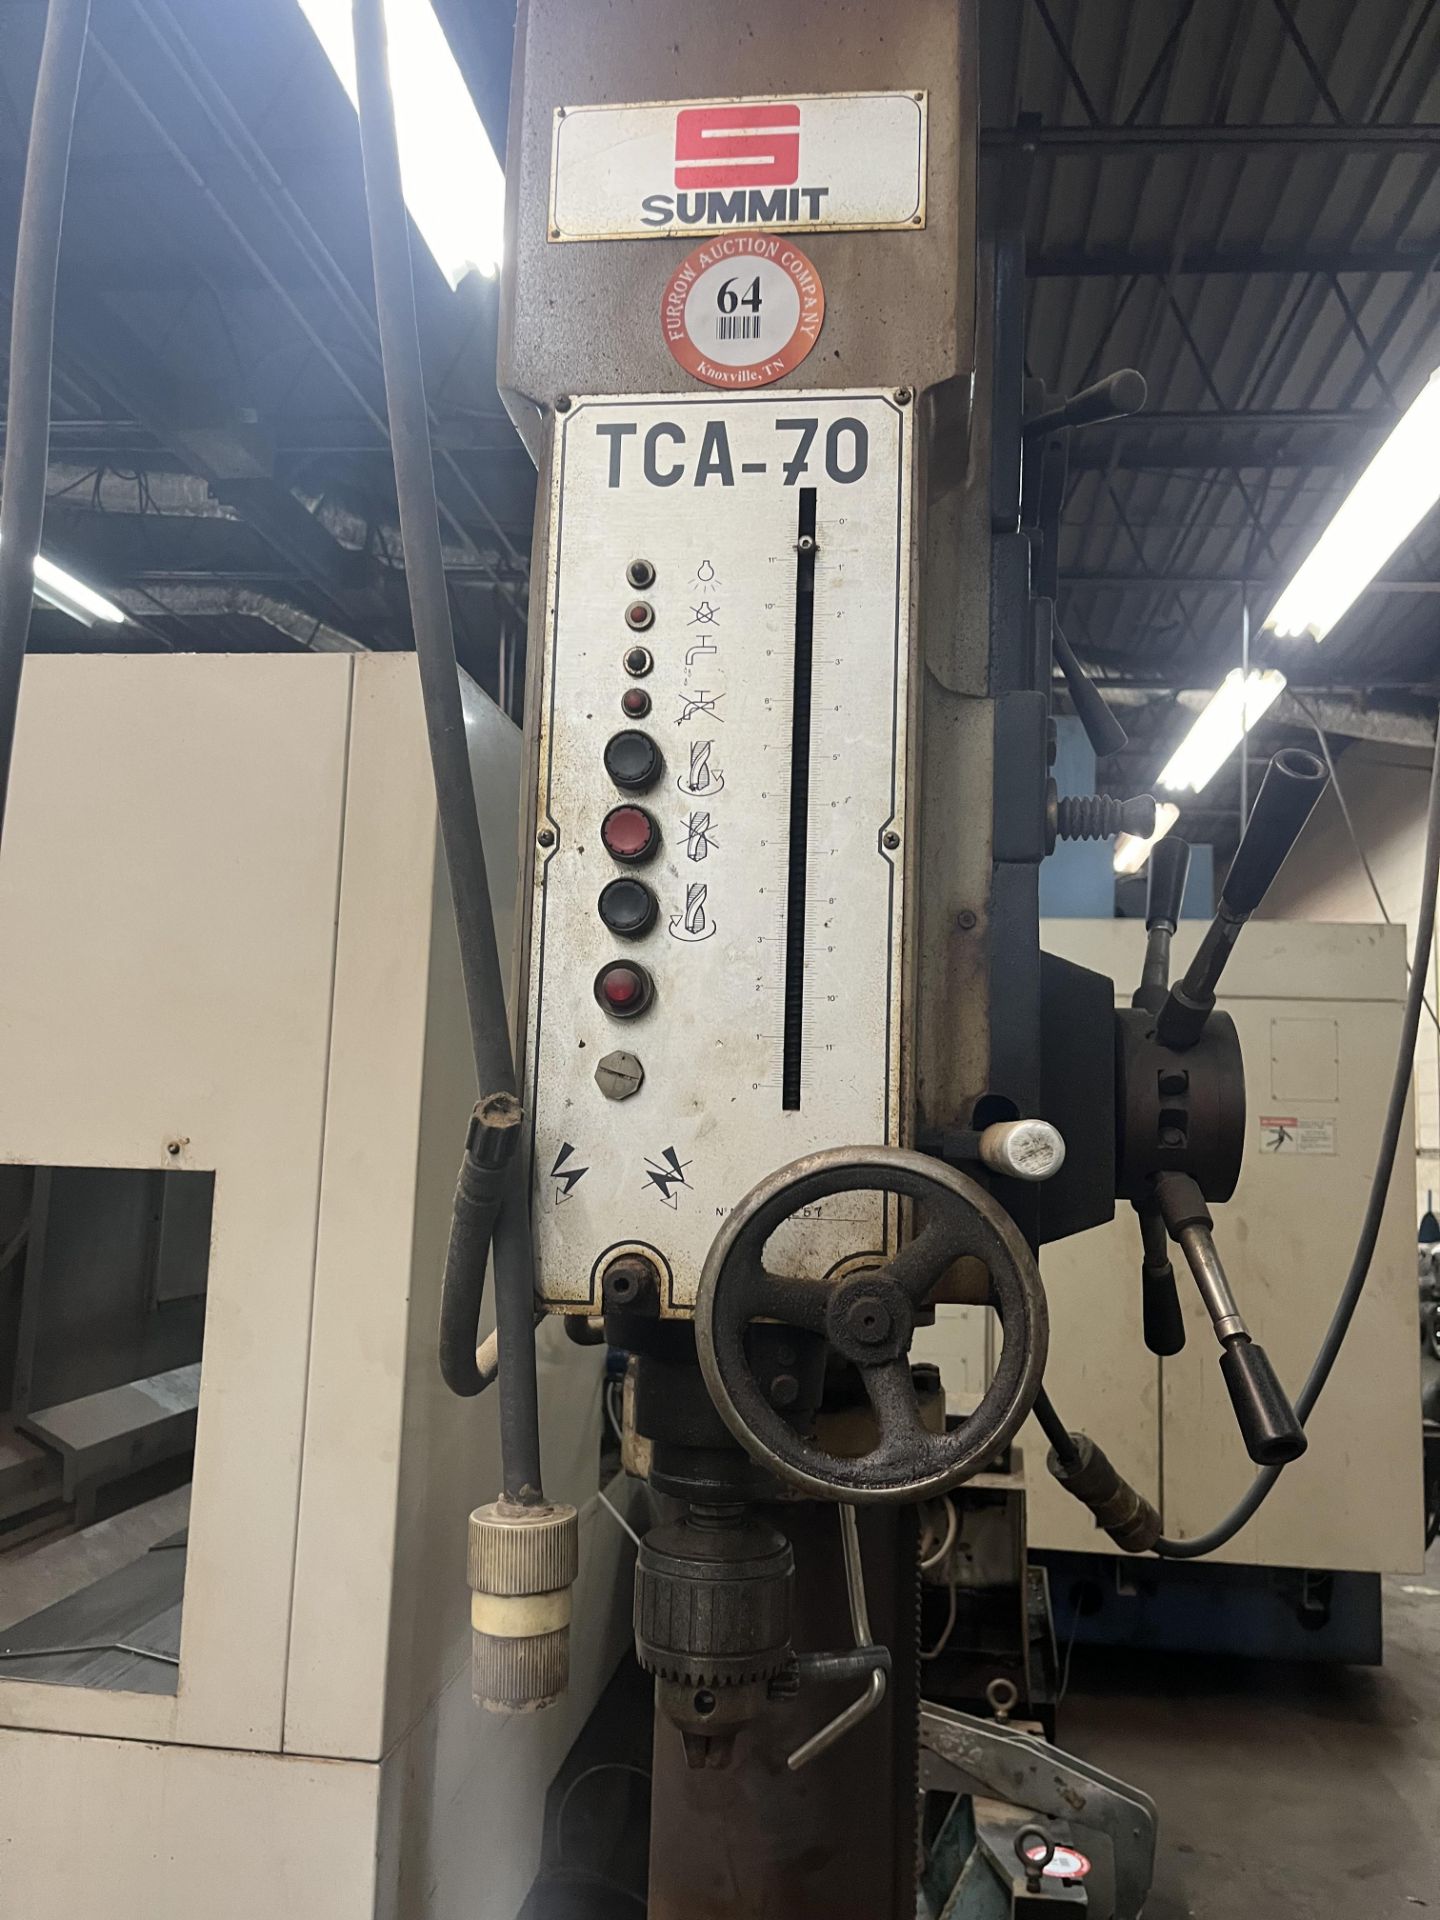 Summit Series TCA-70, Model 5XHD Vertical Drill Press/Tapping Machine, with Auto Feed, S/N 257 - Image 2 of 4